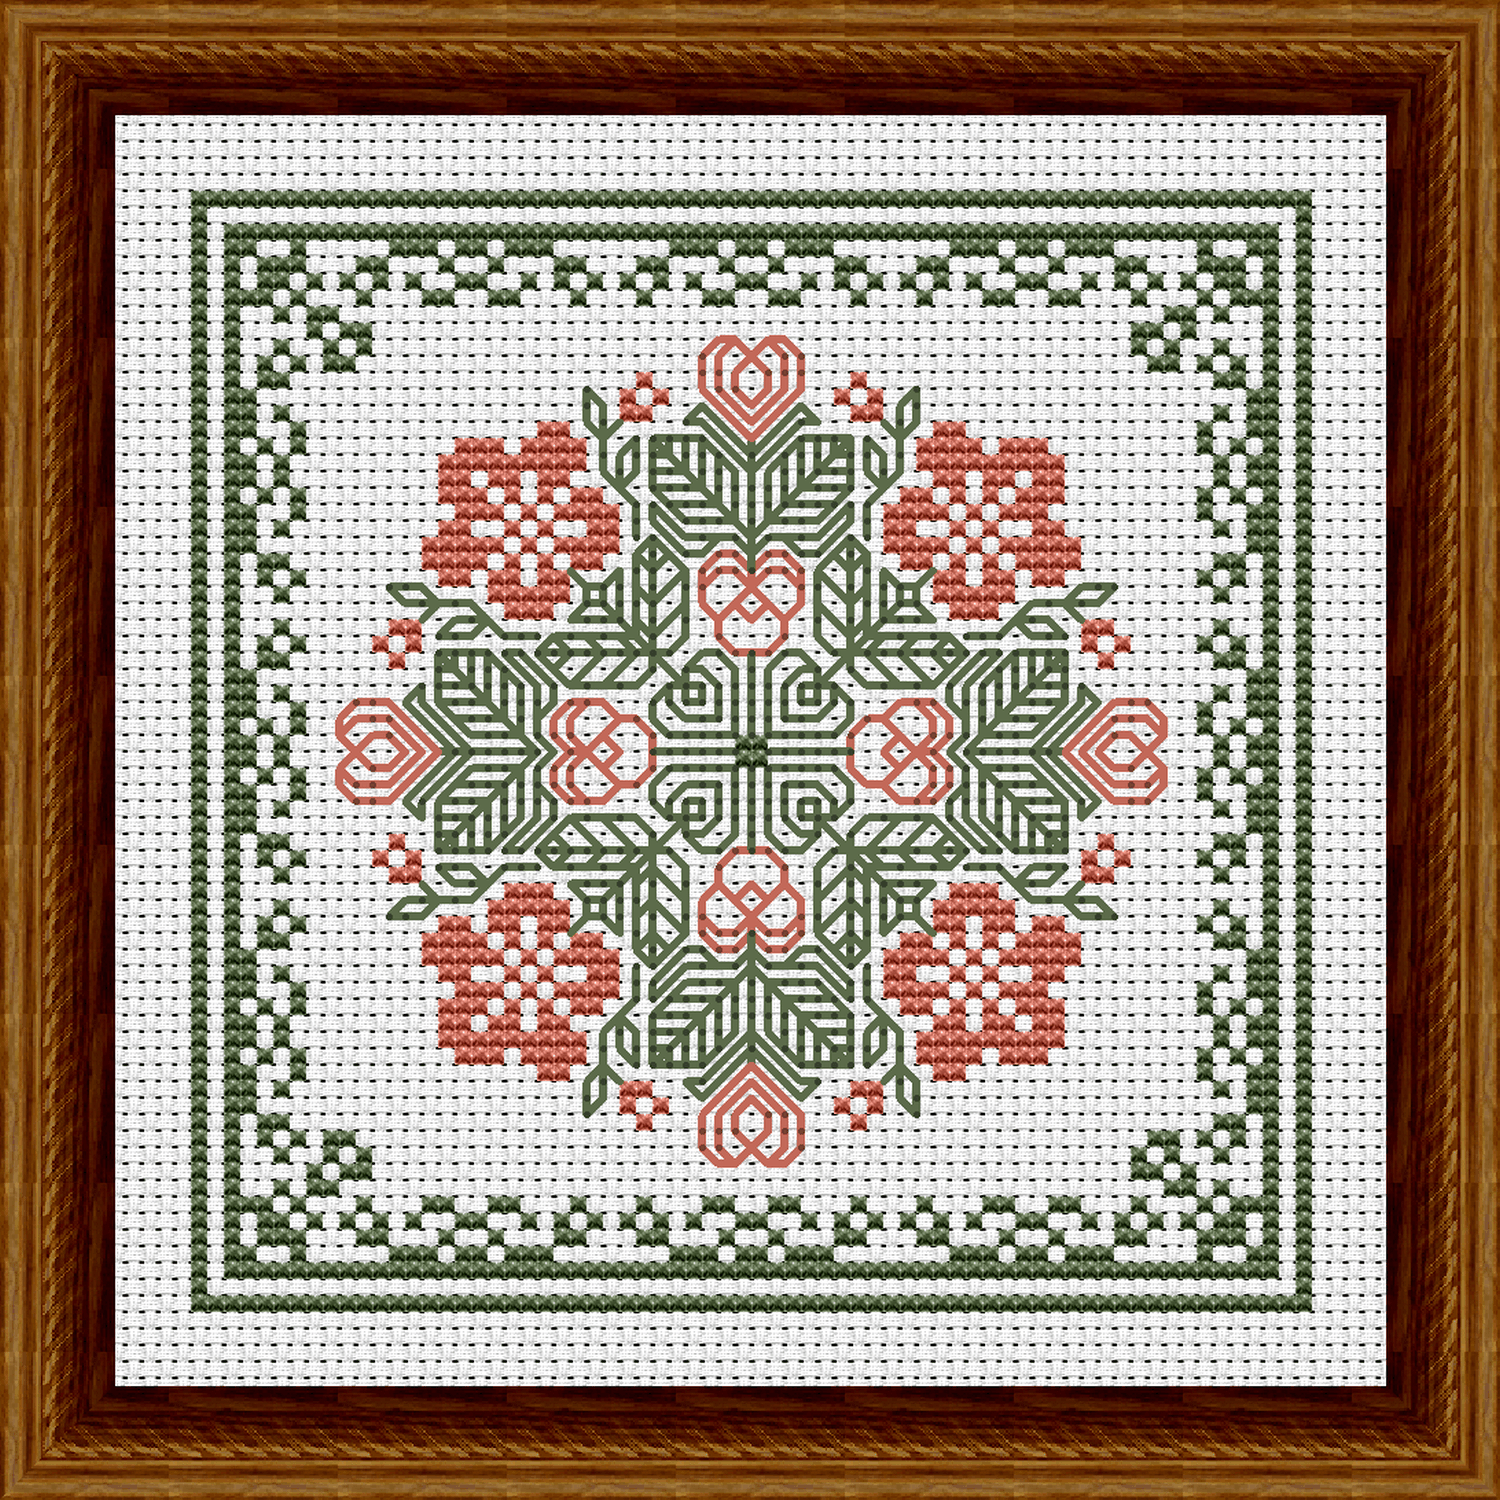 November Hearts Square with Pansies Cross Stitch Pattern 3510